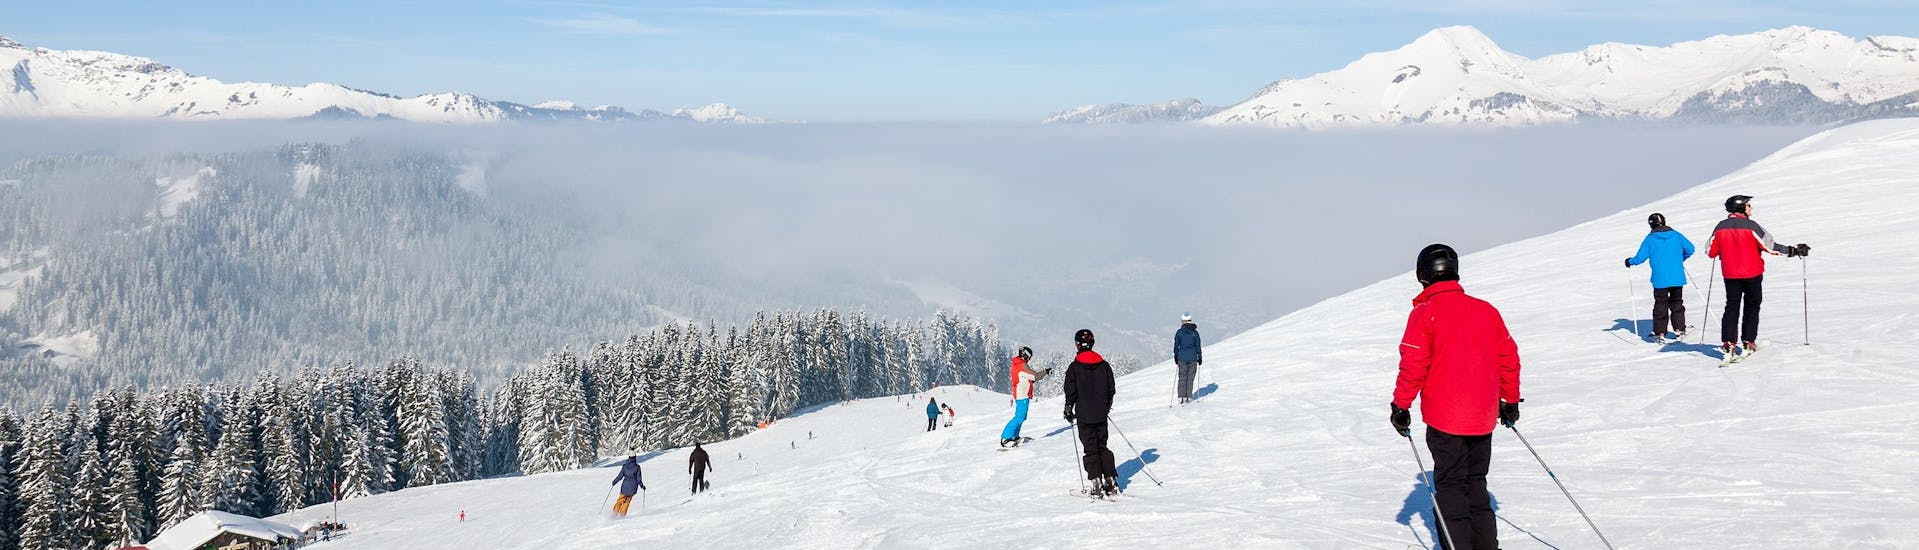 A number of skiers is skiing down a ski slope in the ski resort of Morzine, with a beautiful view of the surrounding mountainscape that is visible to all who book ski lessons with the local ski schools. 